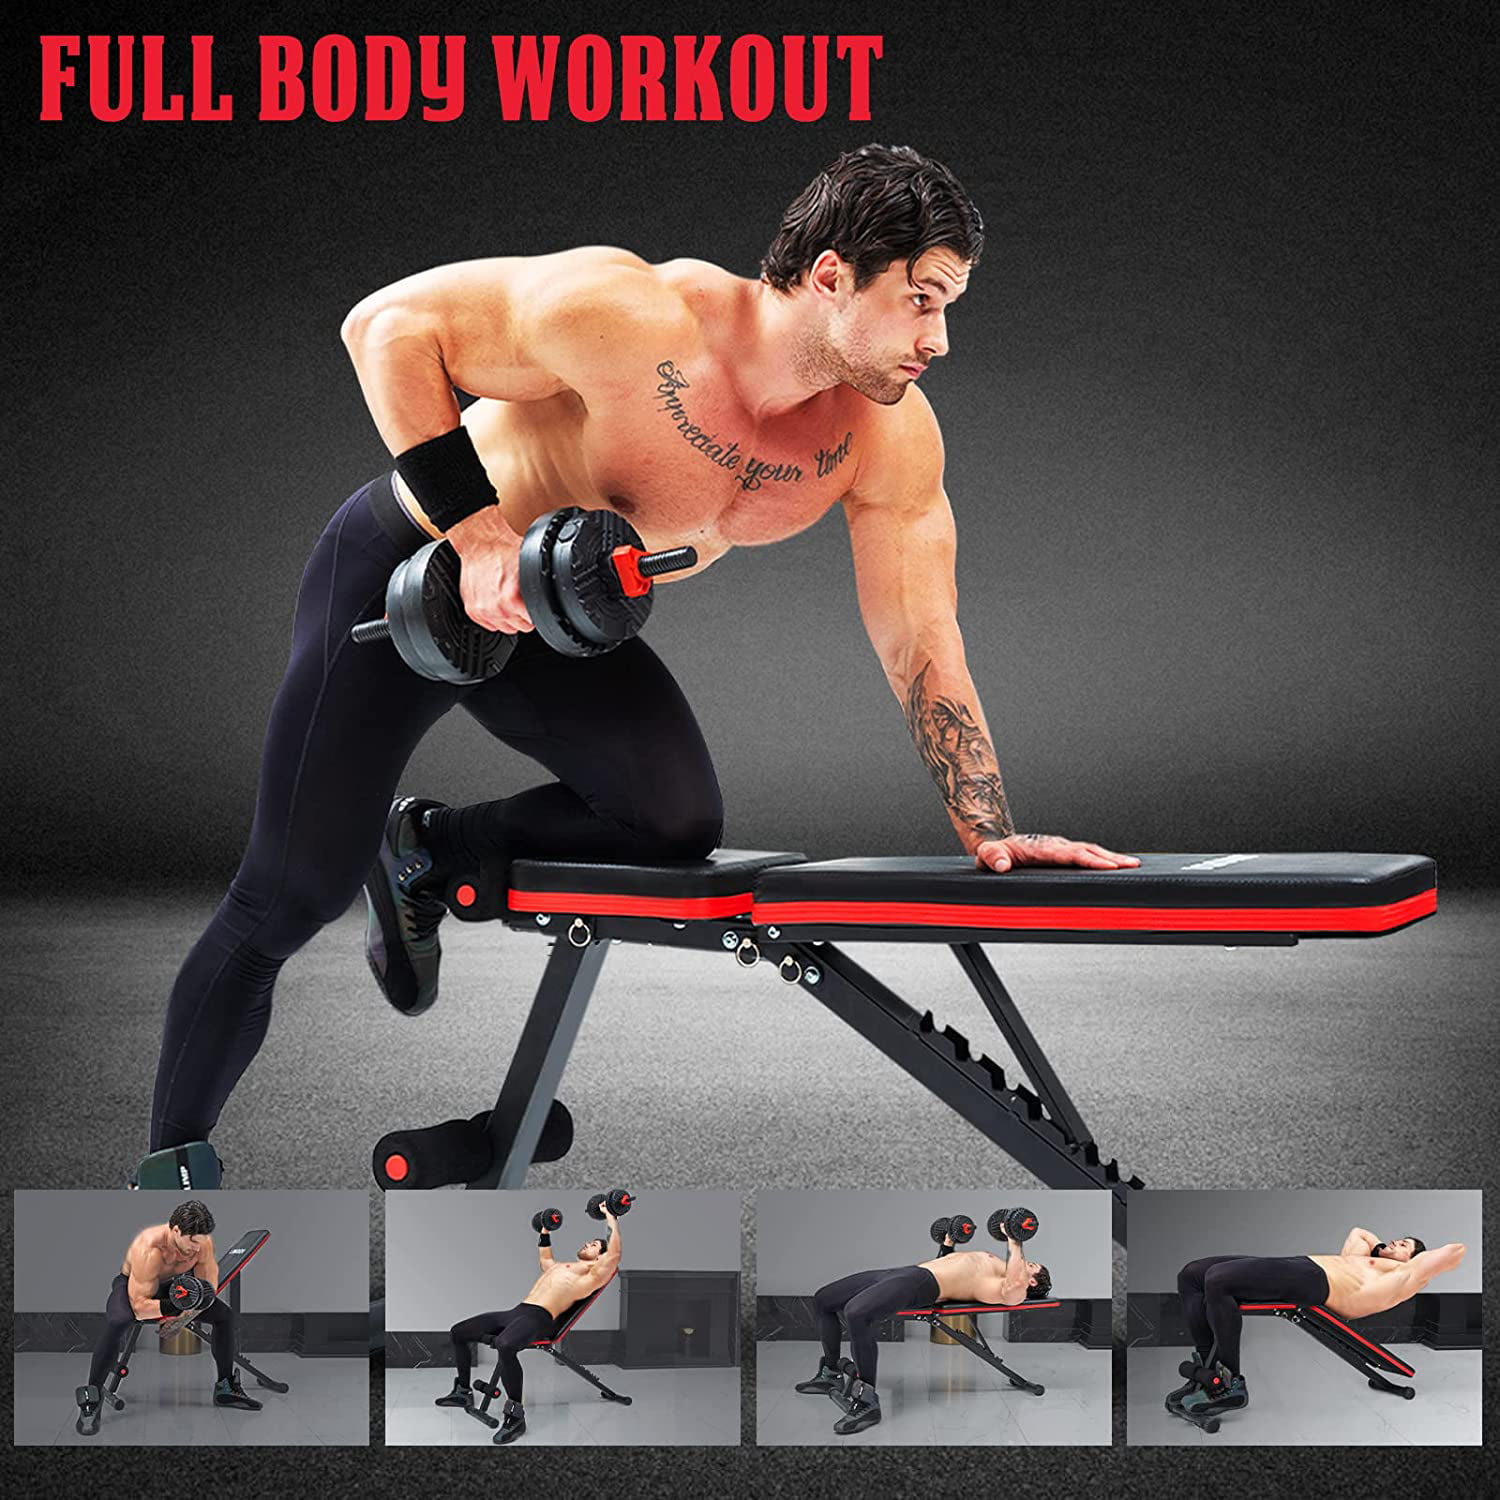 LINODI Adjustable Weight Bench Workout Bench for Home Gym Multi-Purpose Strength Training Benches Foldable Incline Decline Gym Bench for Full Body Workout 